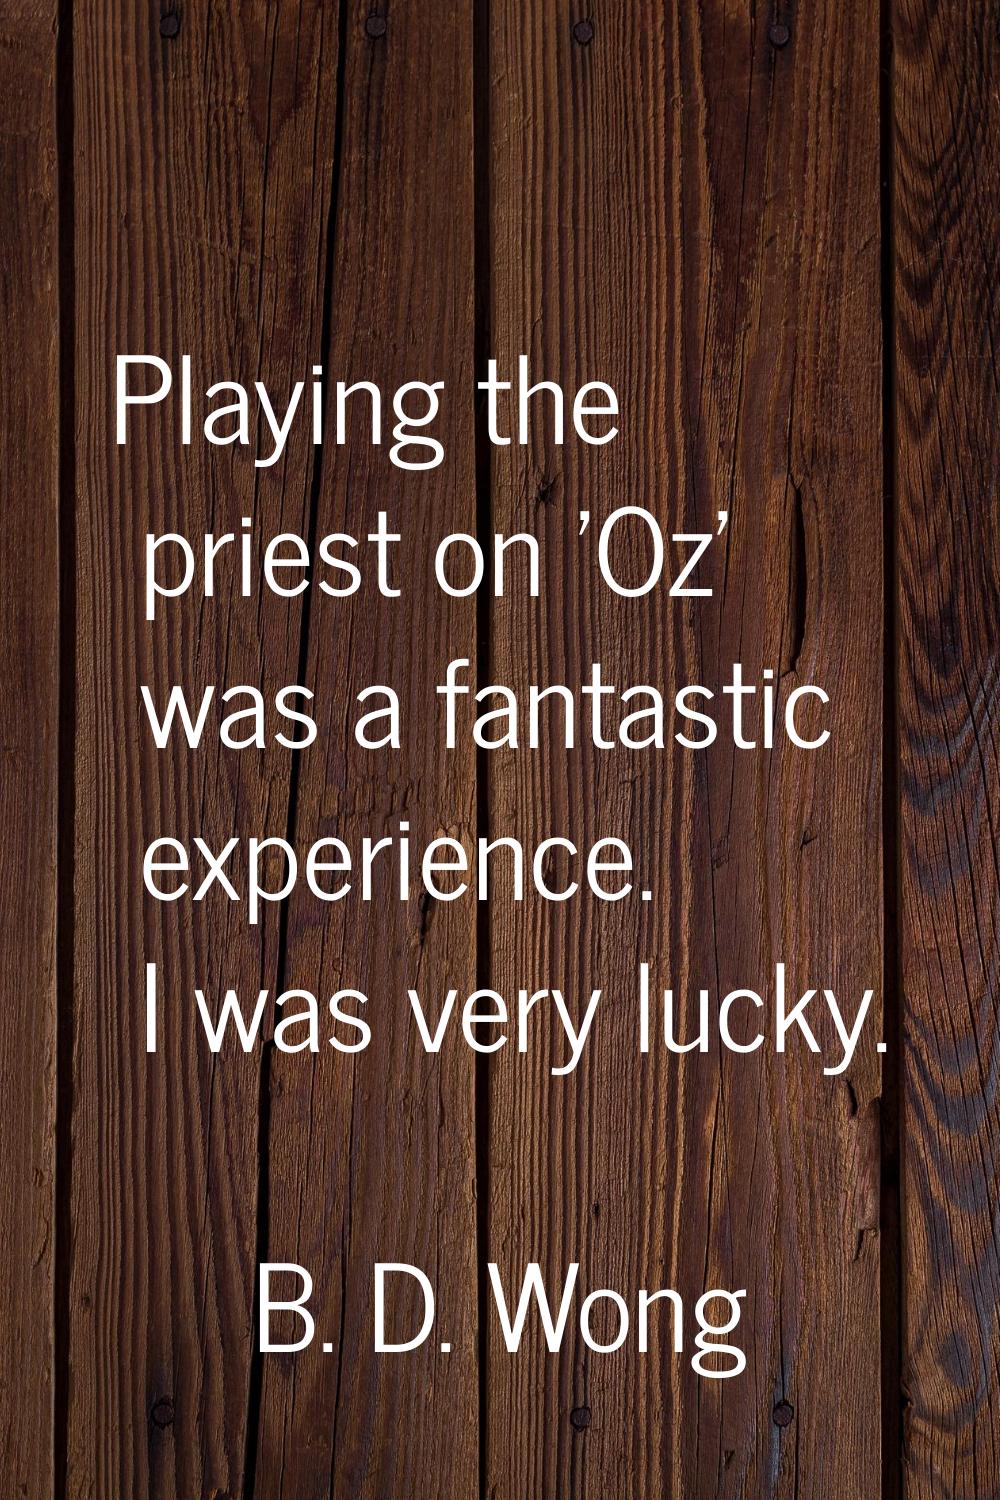 Playing the priest on 'Oz' was a fantastic experience. I was very lucky.